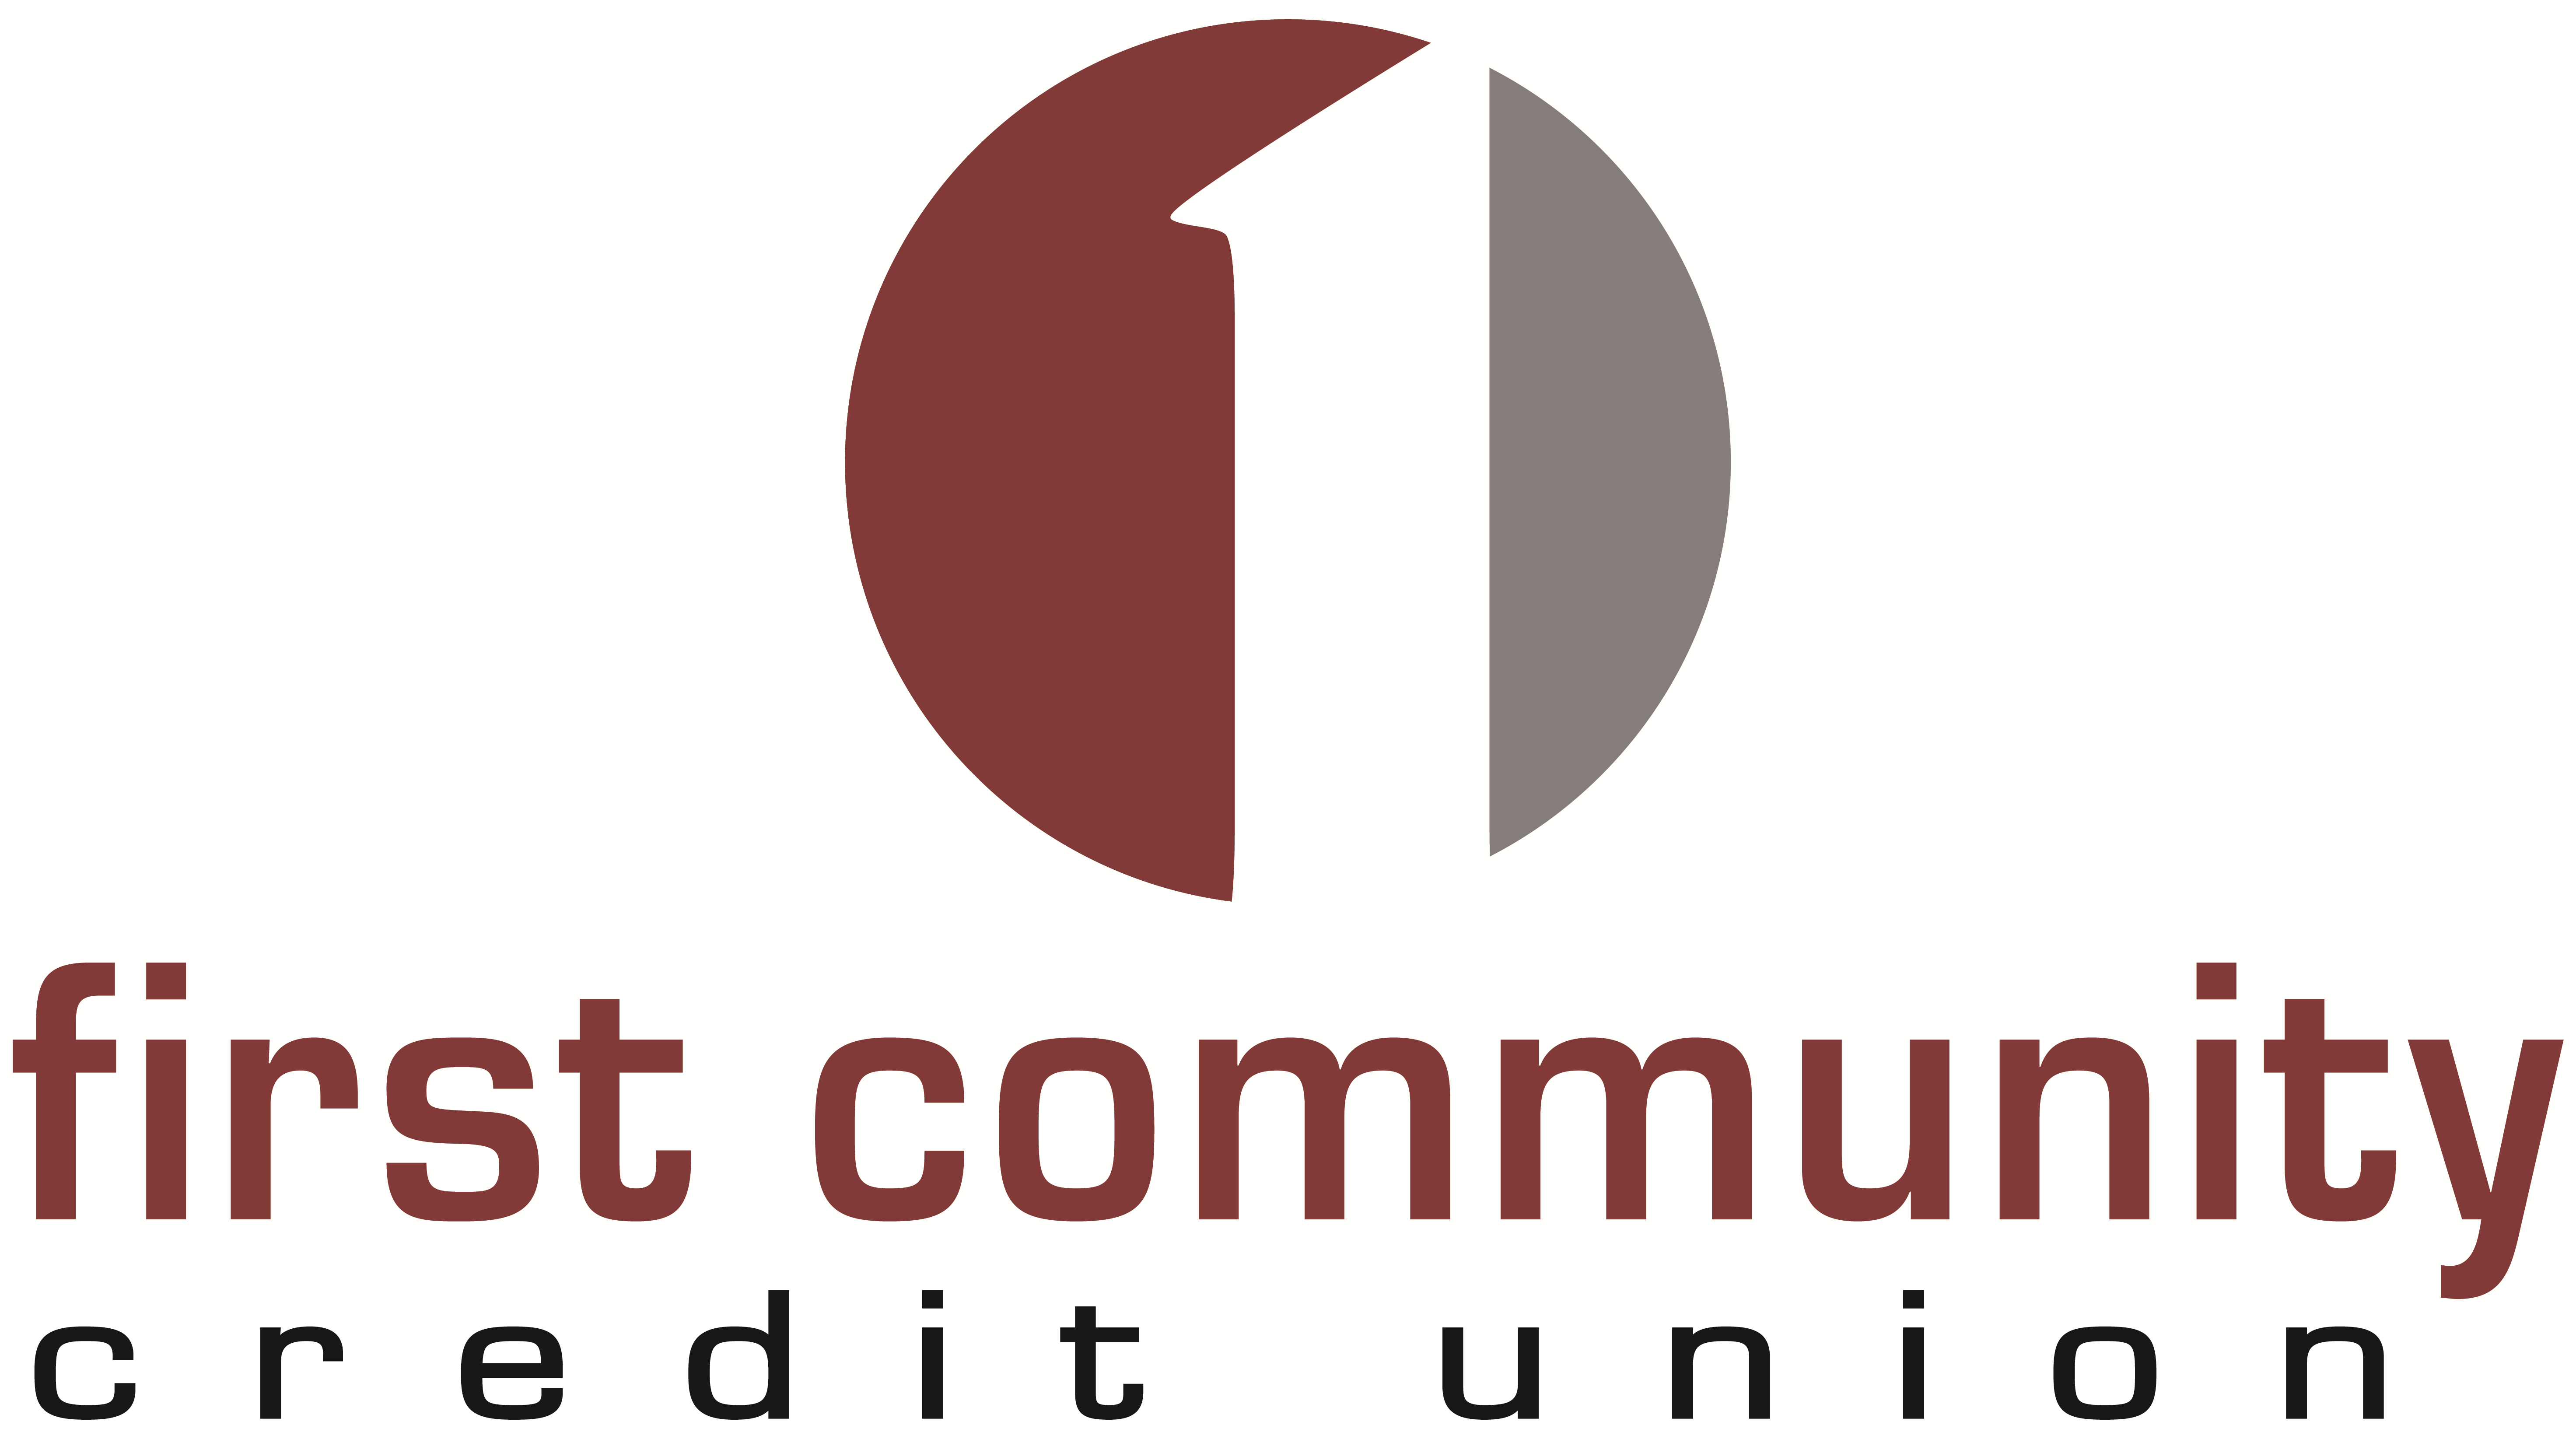 First community credit union job openings